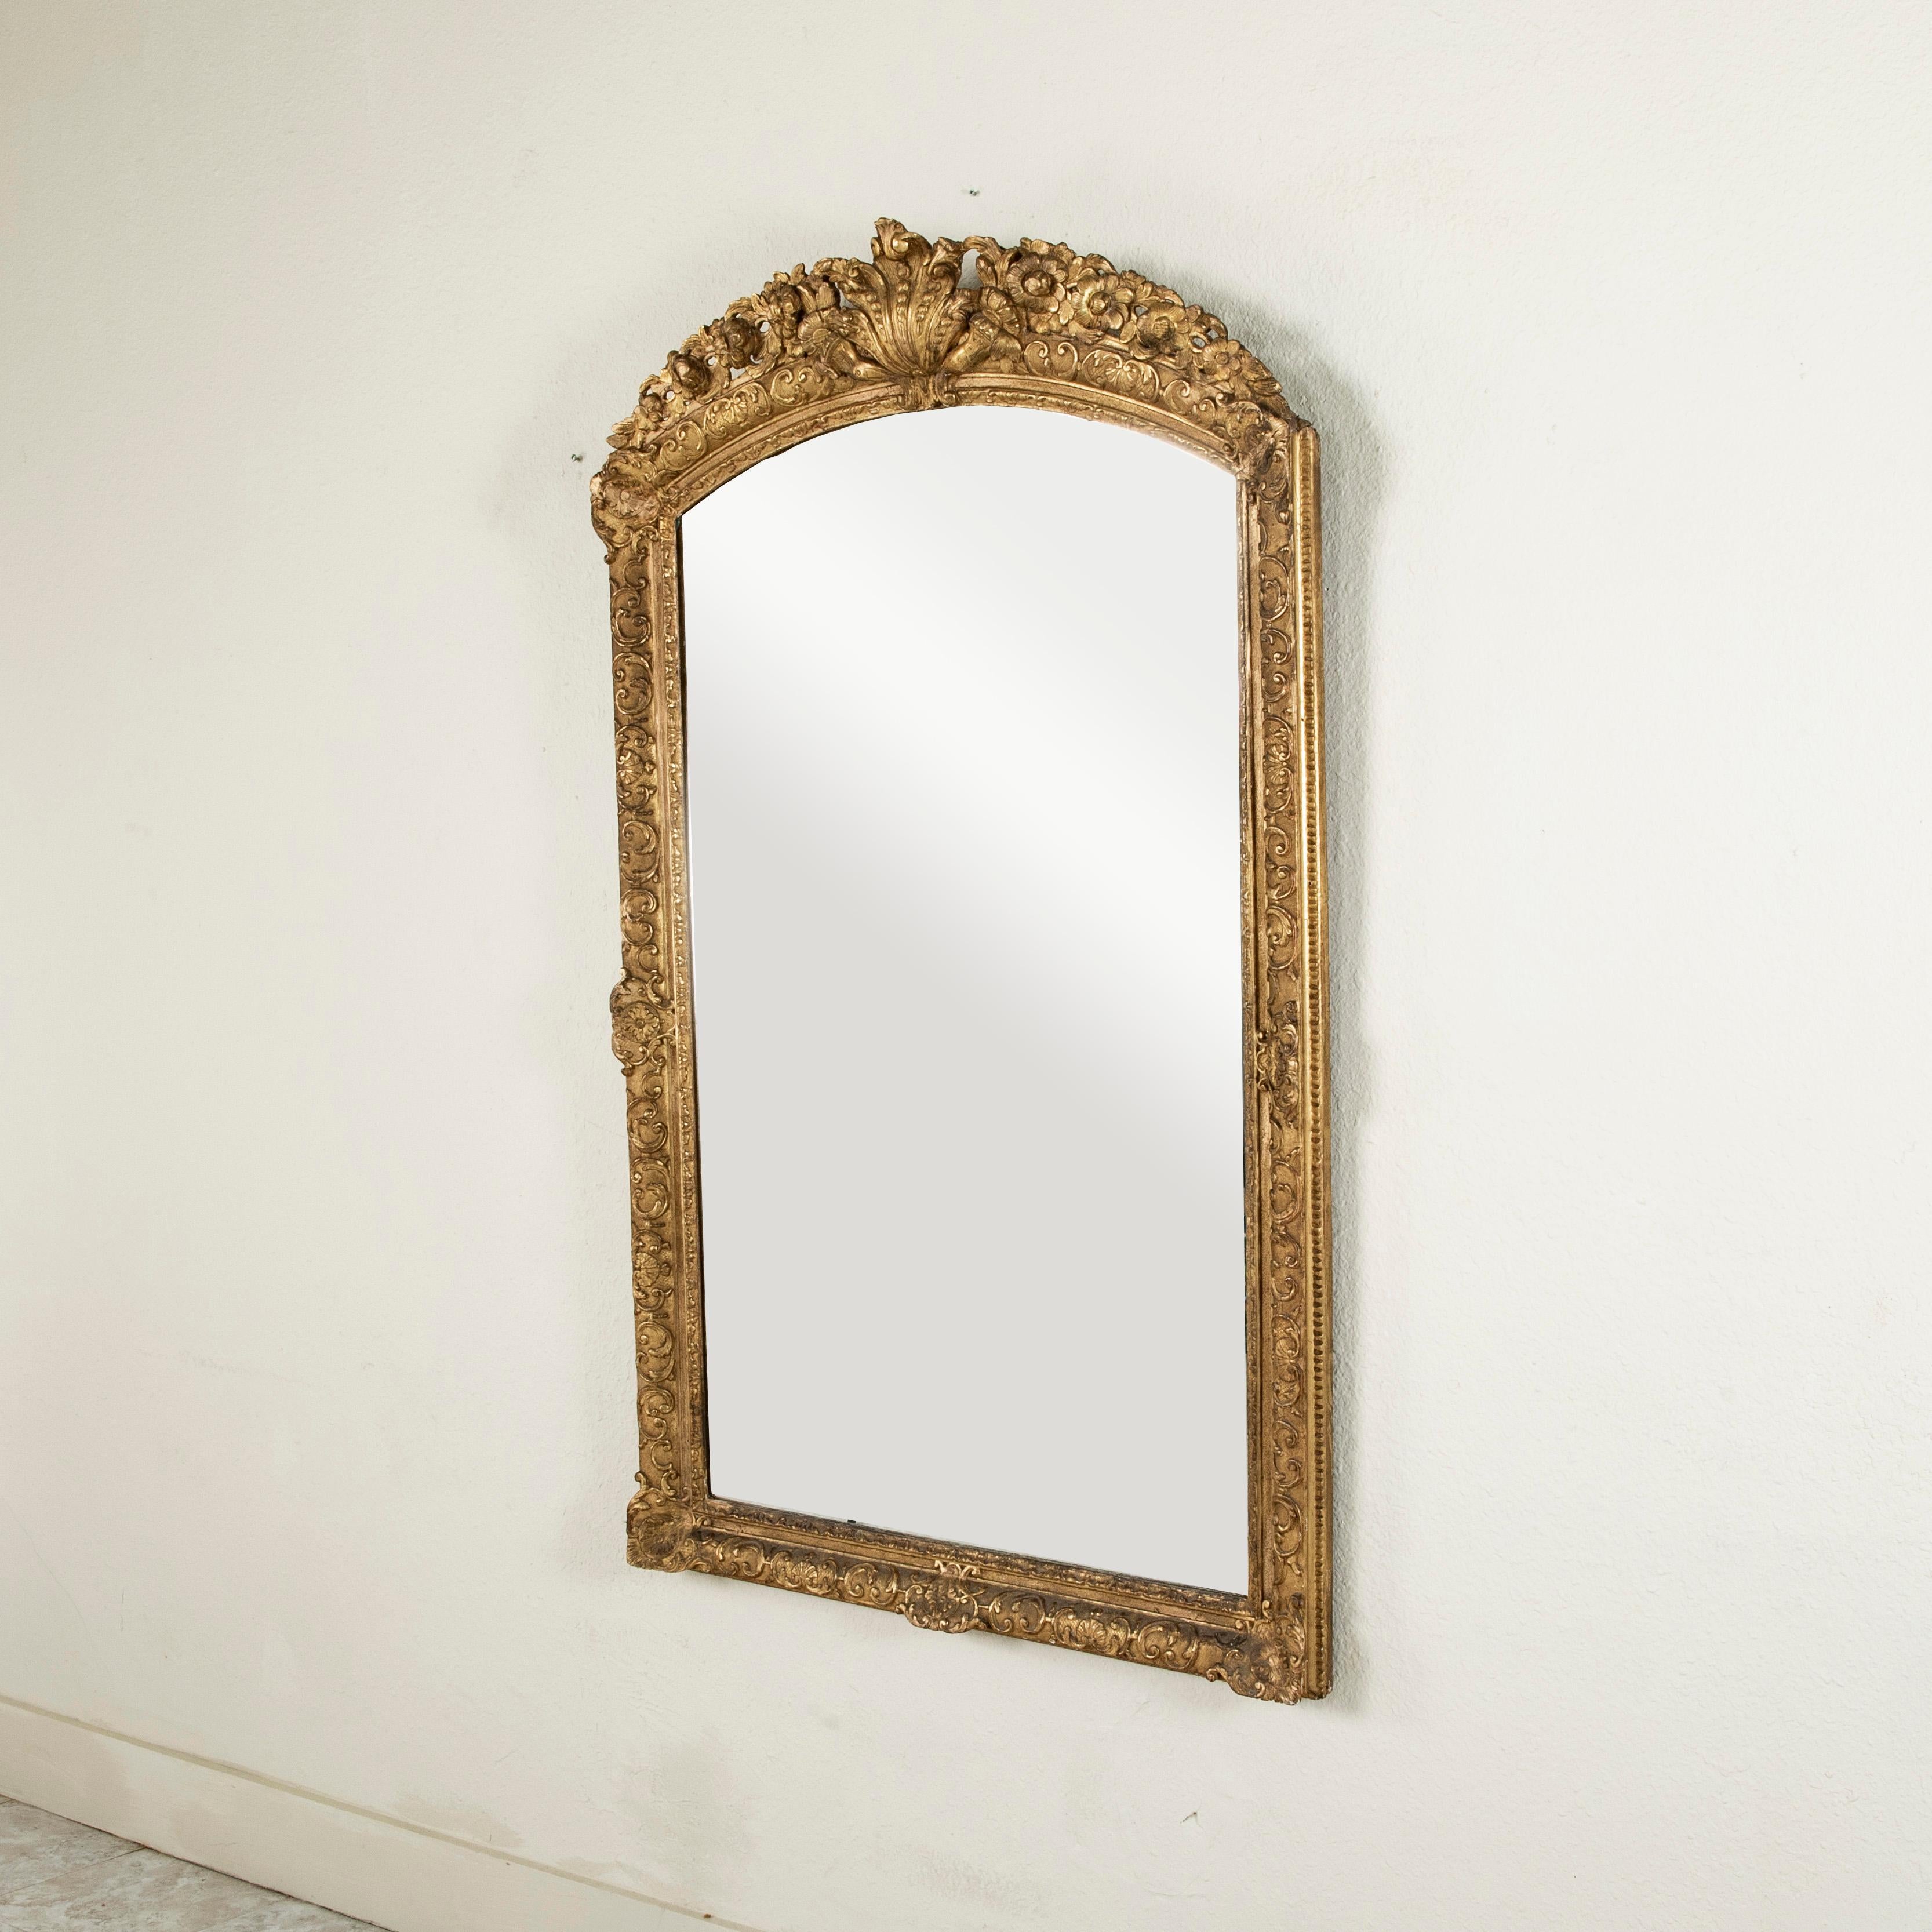 This mid eighteenth century French Regency period gilt wood mirror features a hand carved frame detailed with a central scalloped shell at the top, scrolling leaves and flowers. Shells and acanthus leaves detail each corner. Measuring 60 inches in